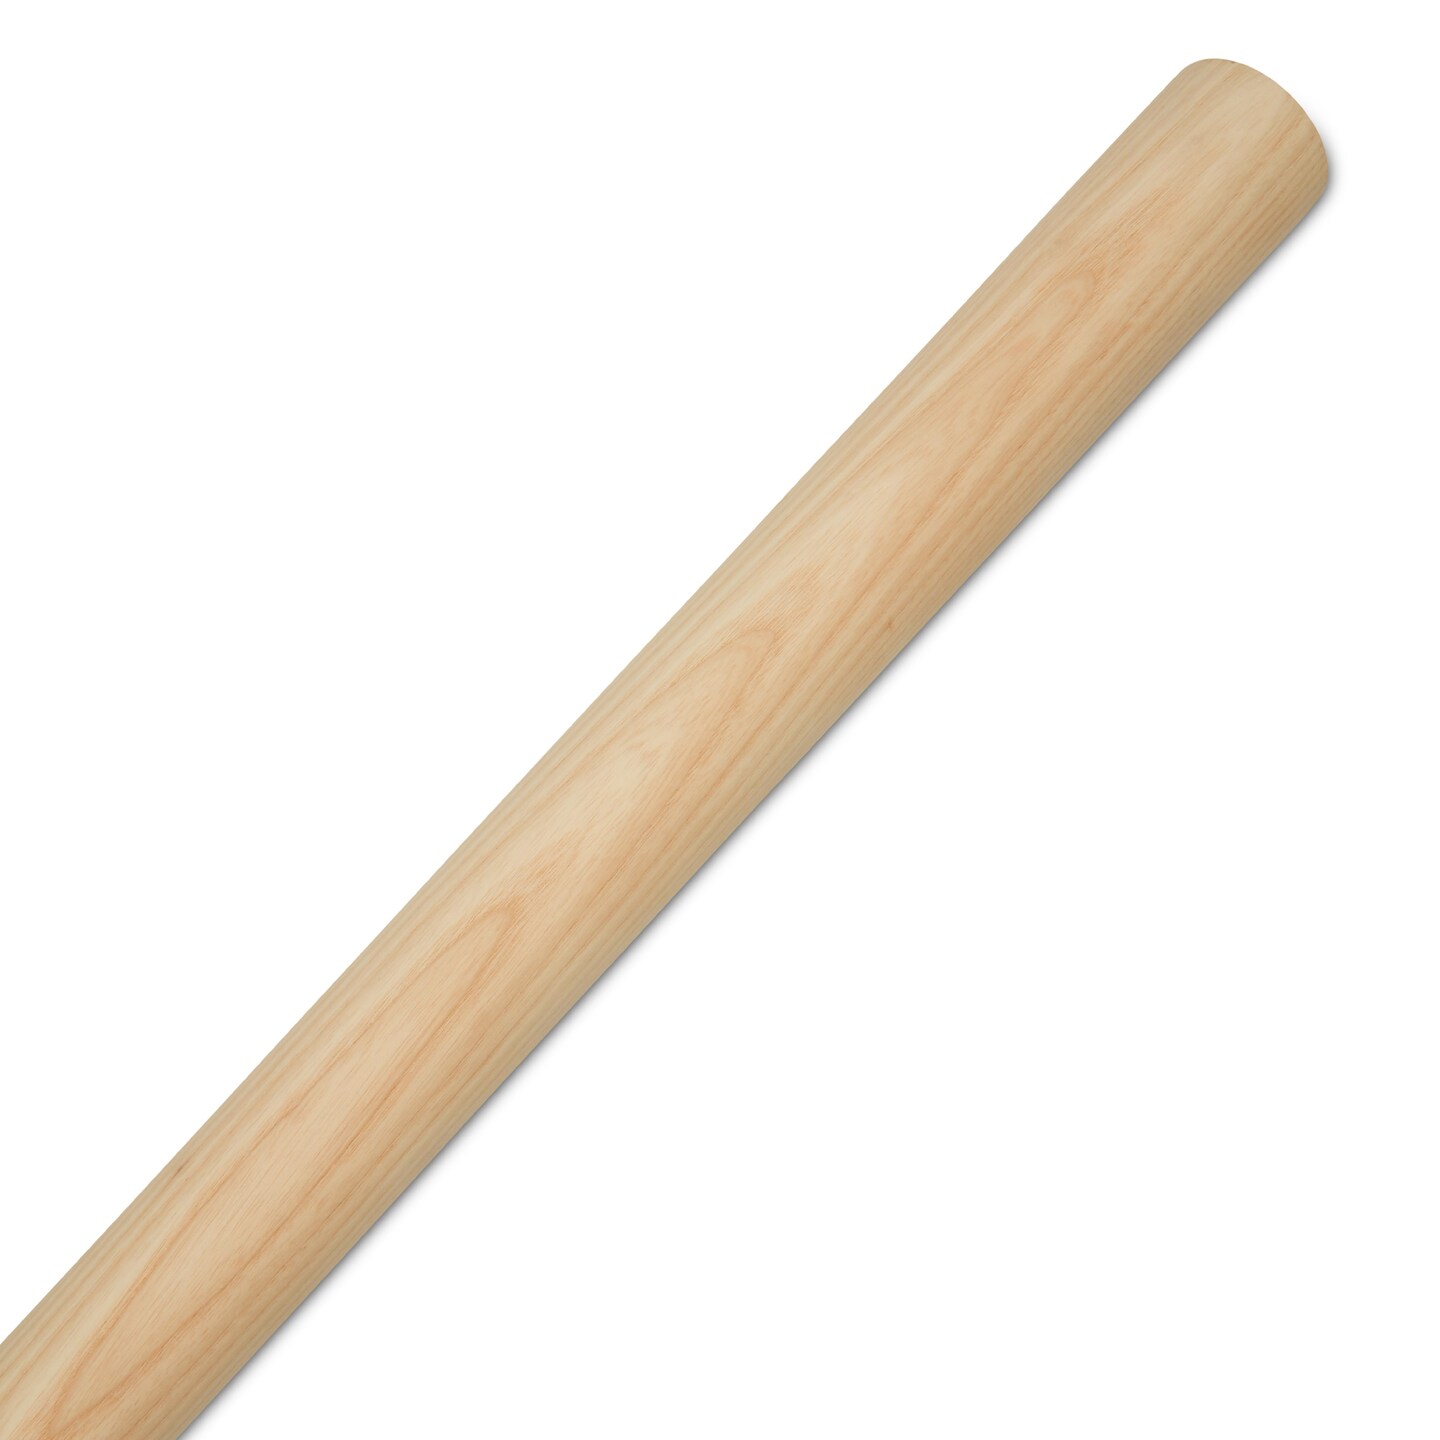 Wooden Dowel Rods 2-1/4 inch Thick, Multiple Lengths Available